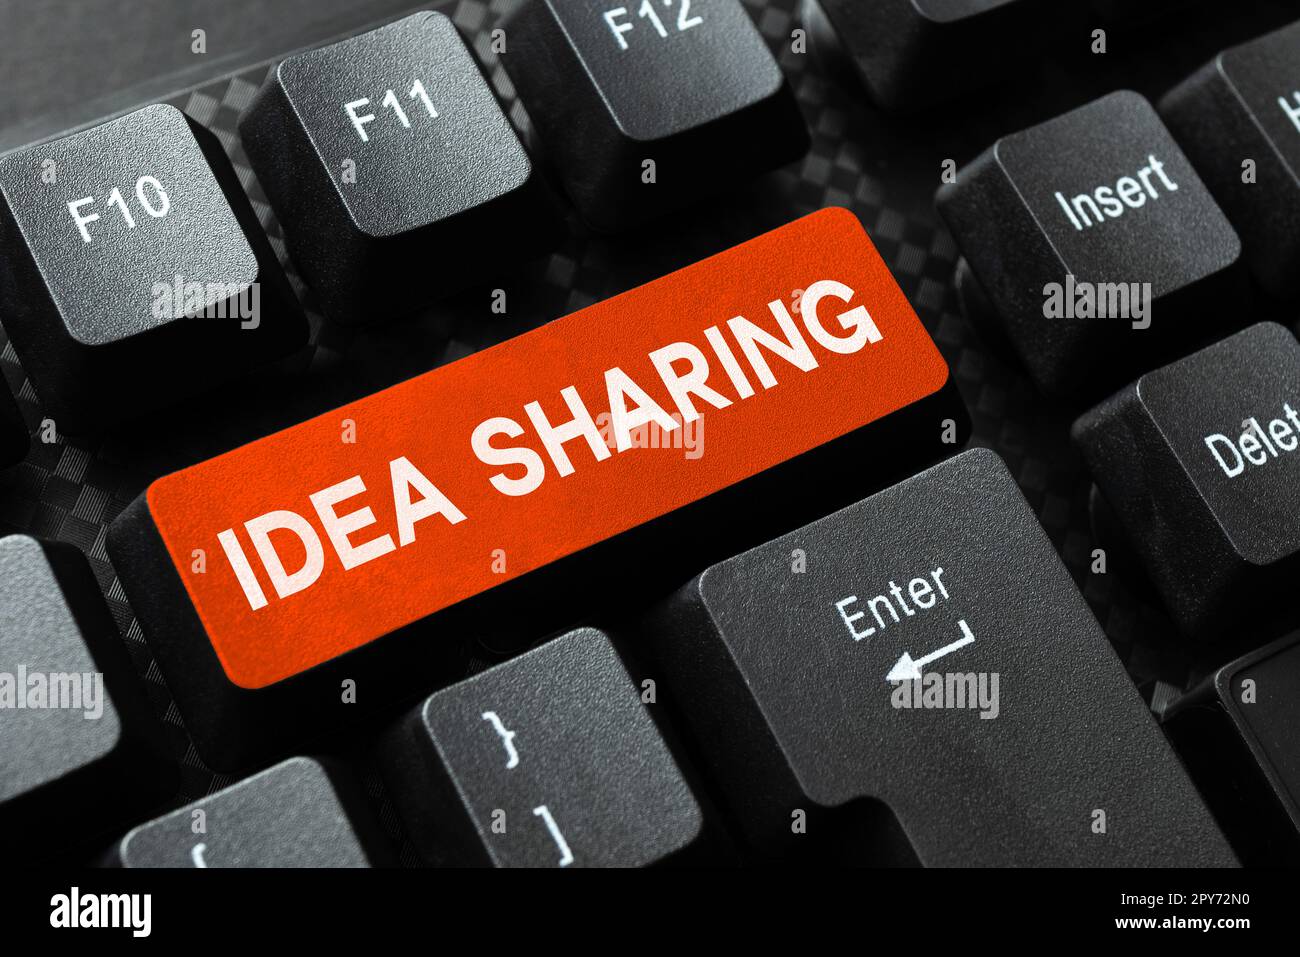 Text sign showing Idea Sharing. Concept meaning Startup launch innovation product, creative thinking Stock Photo